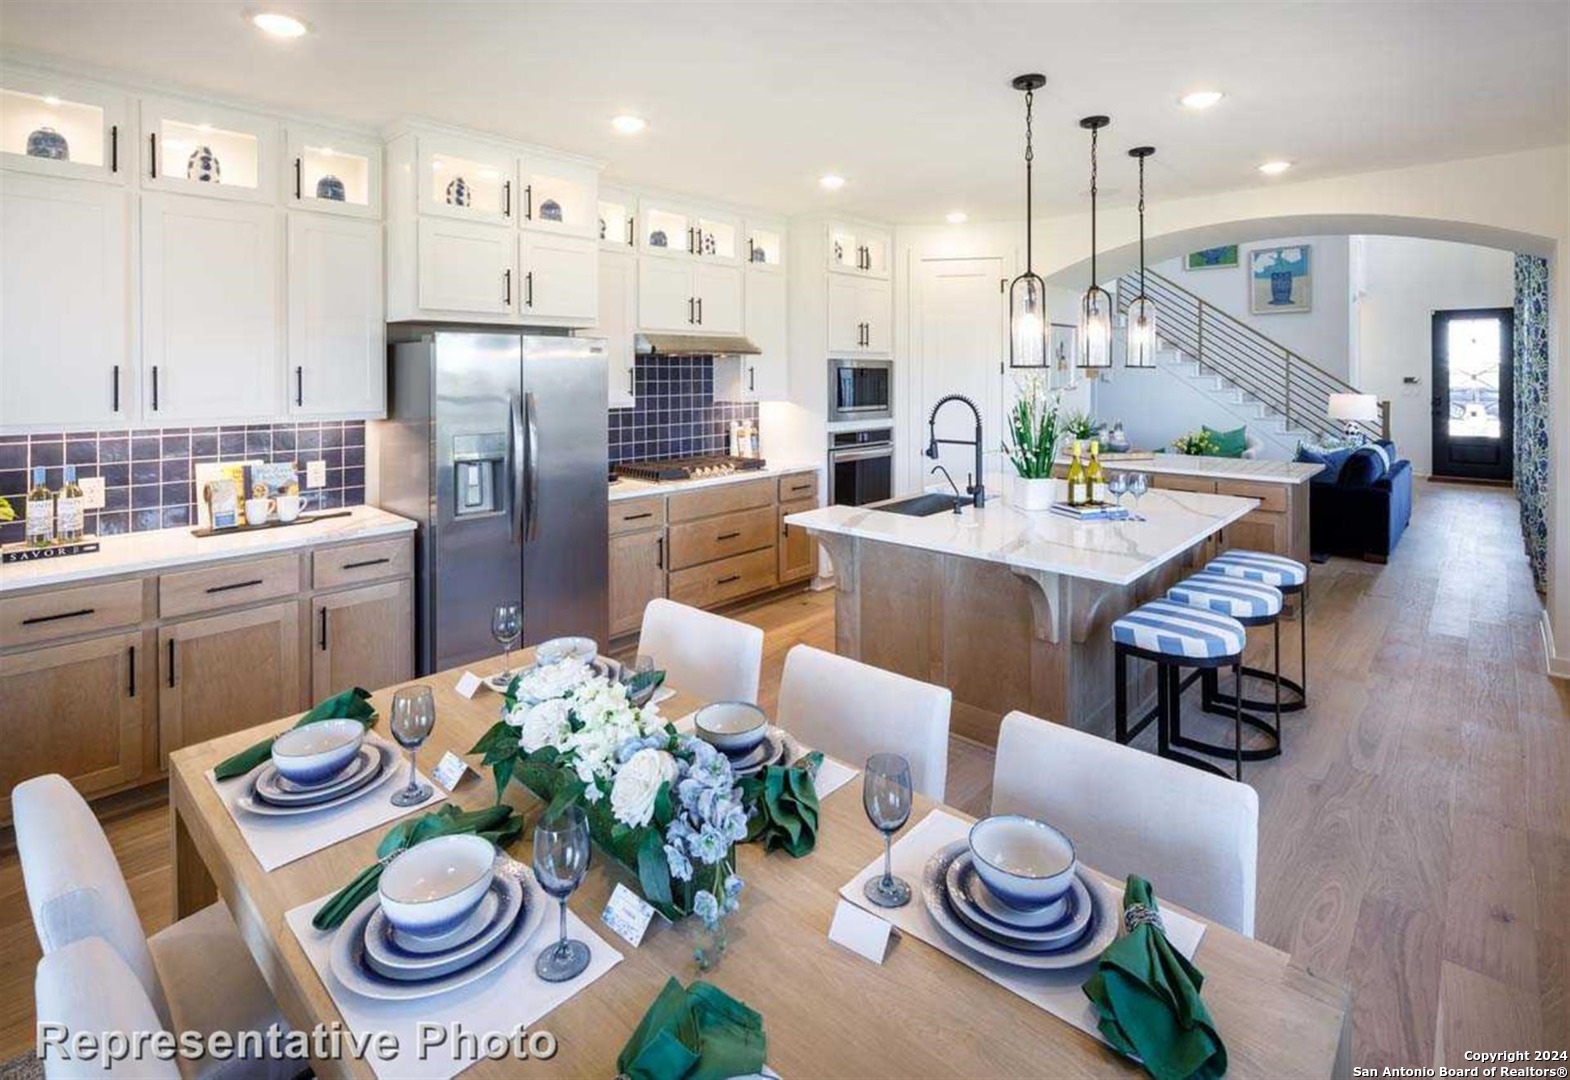 a kitchen with stainless steel appliances kitchen island granite countertop a dining table and chairs